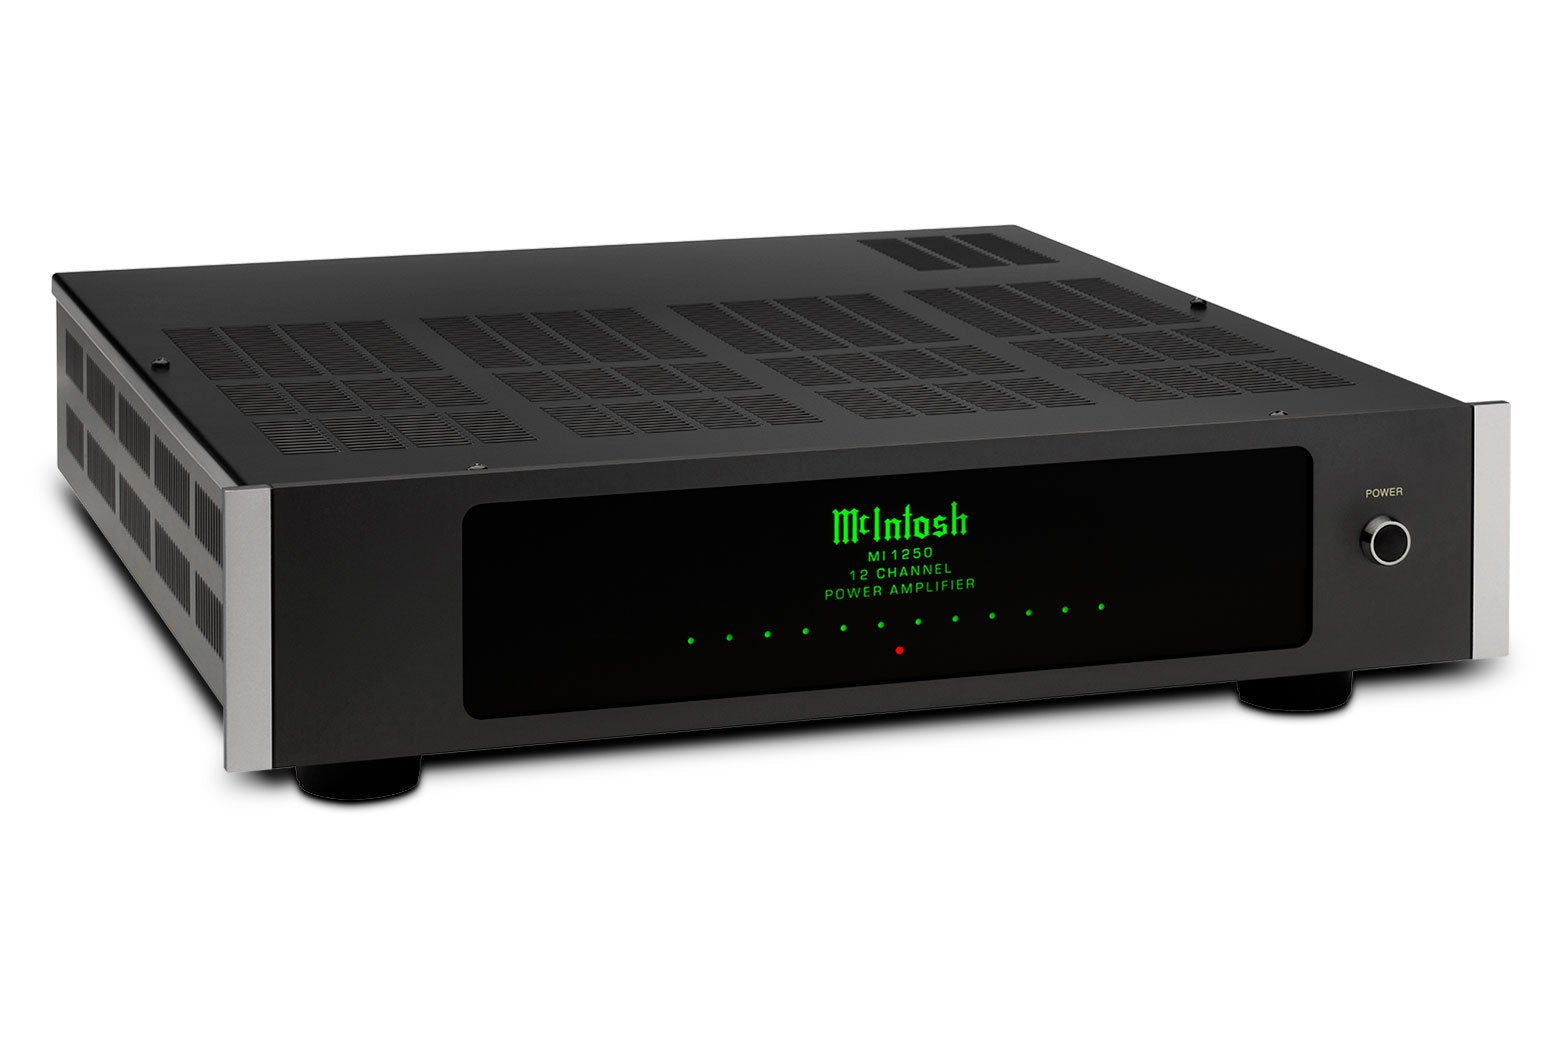 McIntosh MI1250 12-Channel Digital Amplifier (In-Store Purchases Only & USD Pricing)